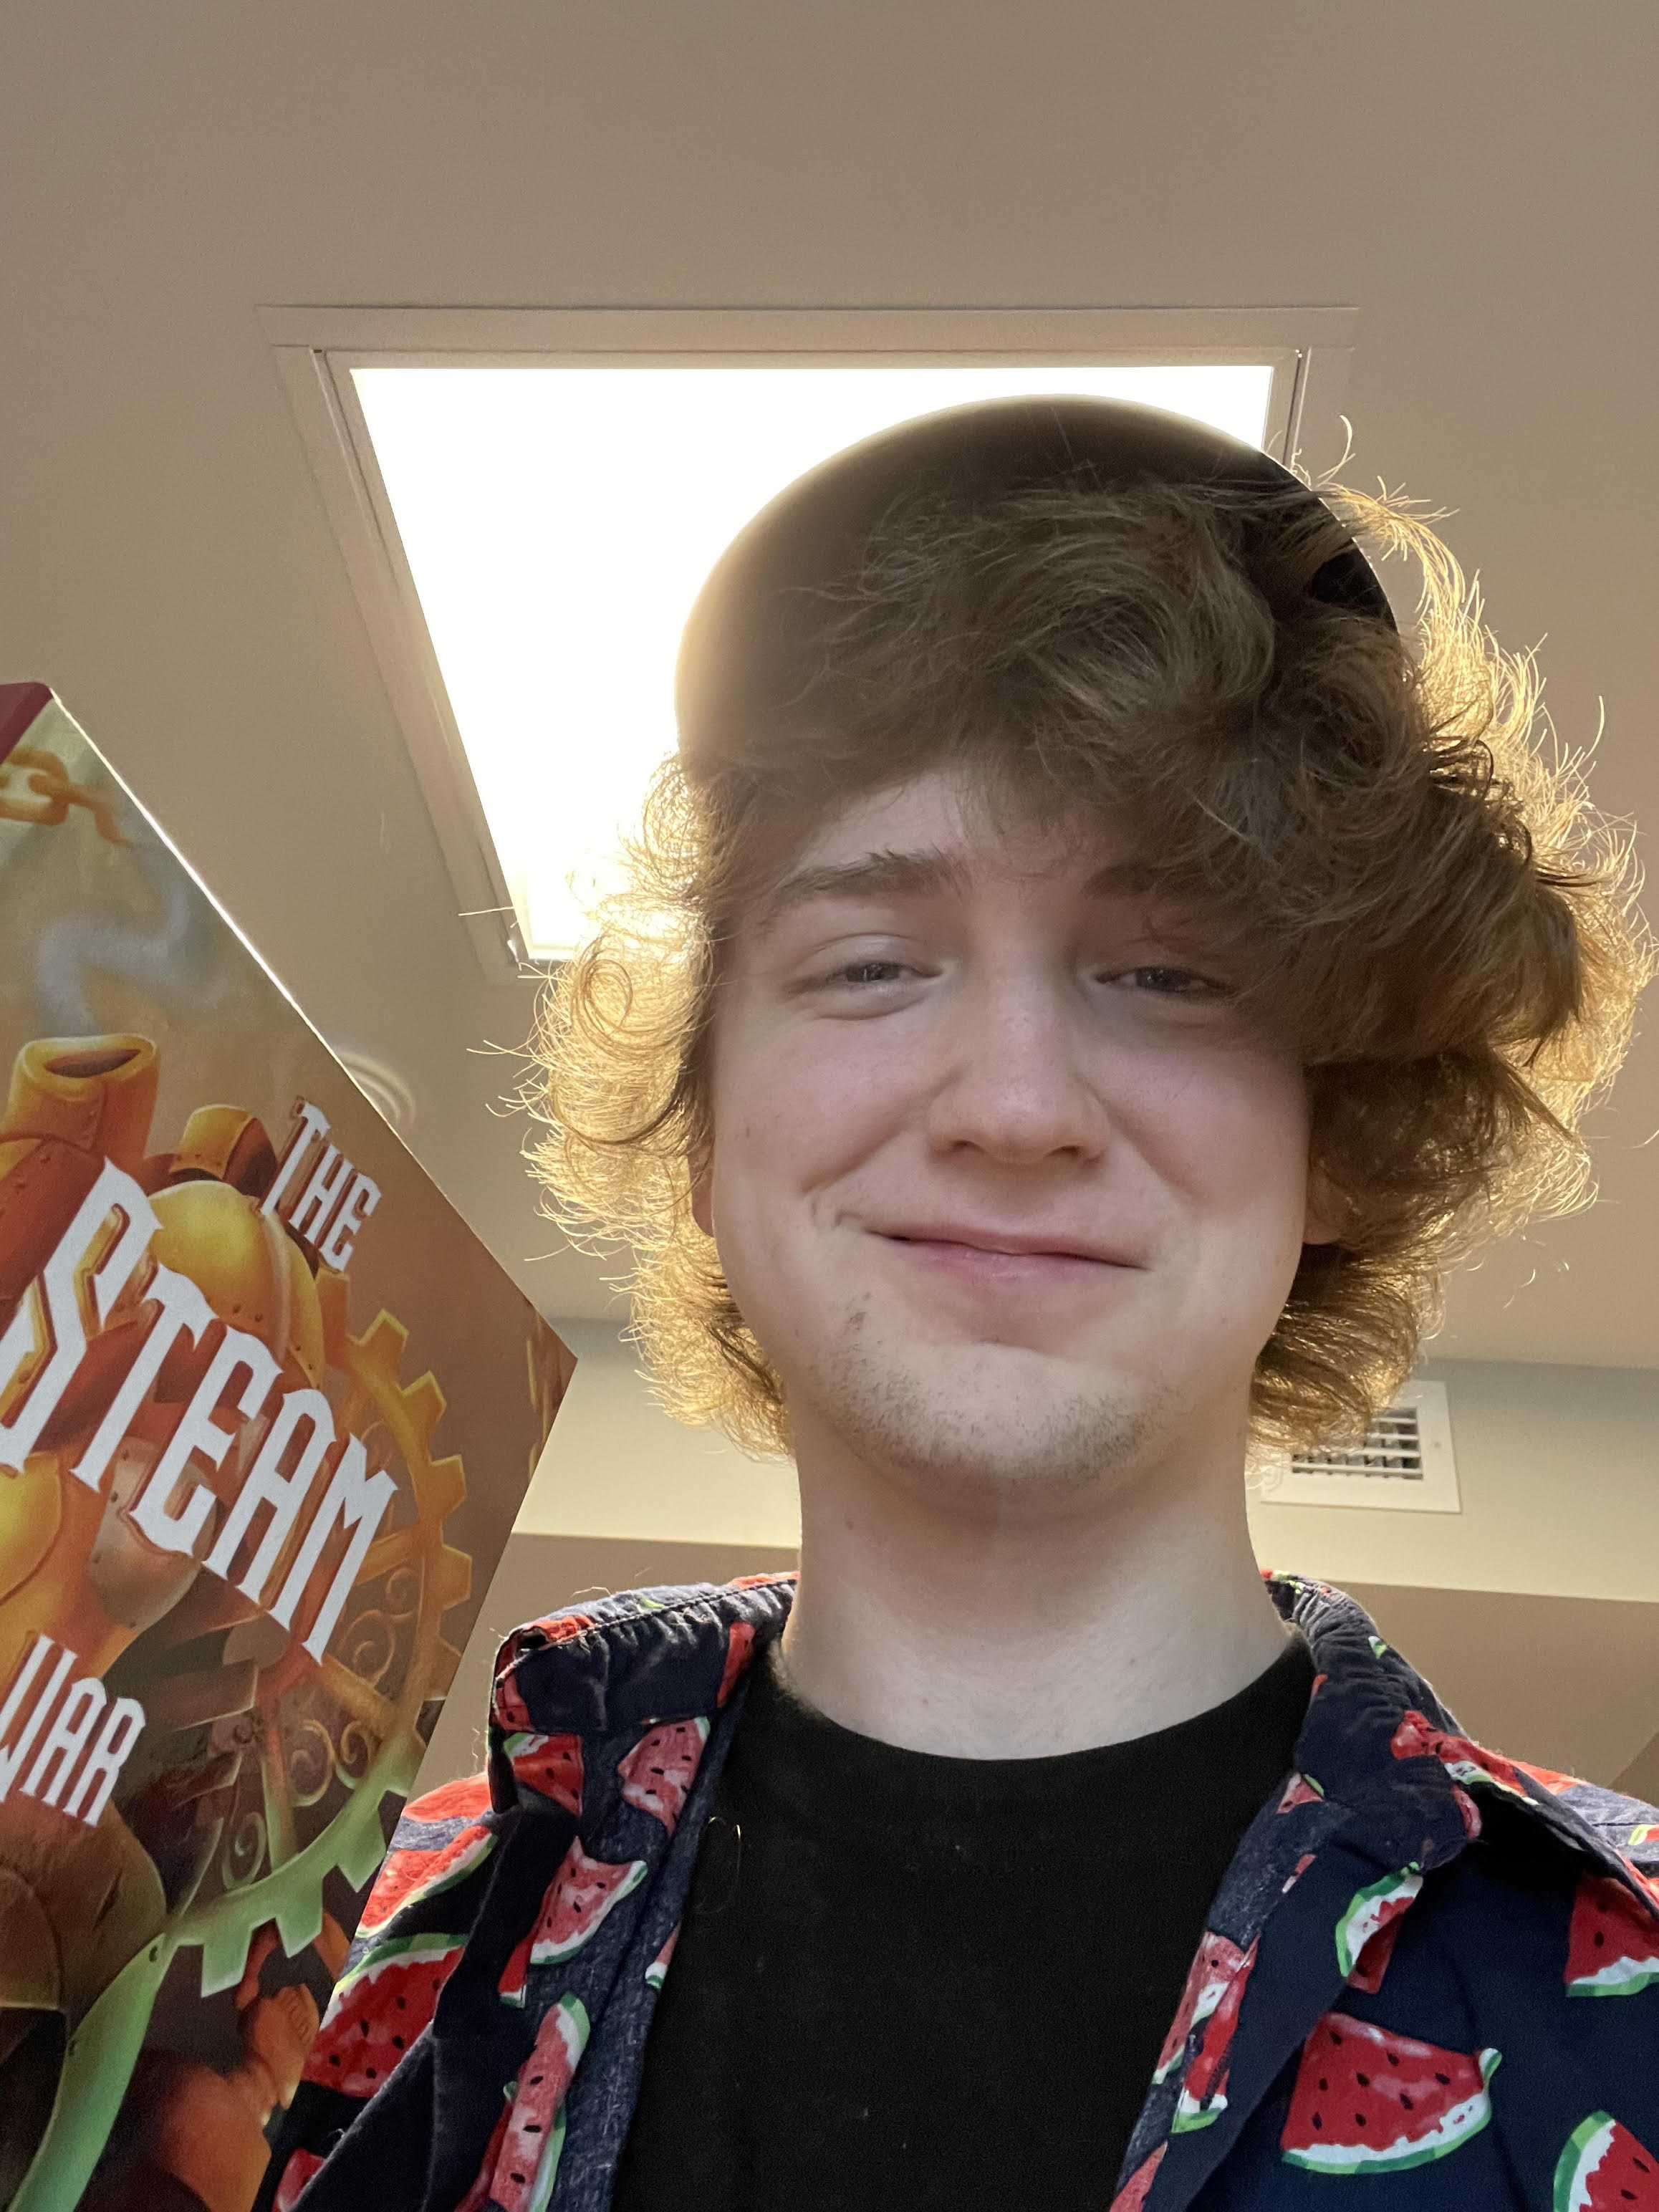 Me holding a copy of The Steam War